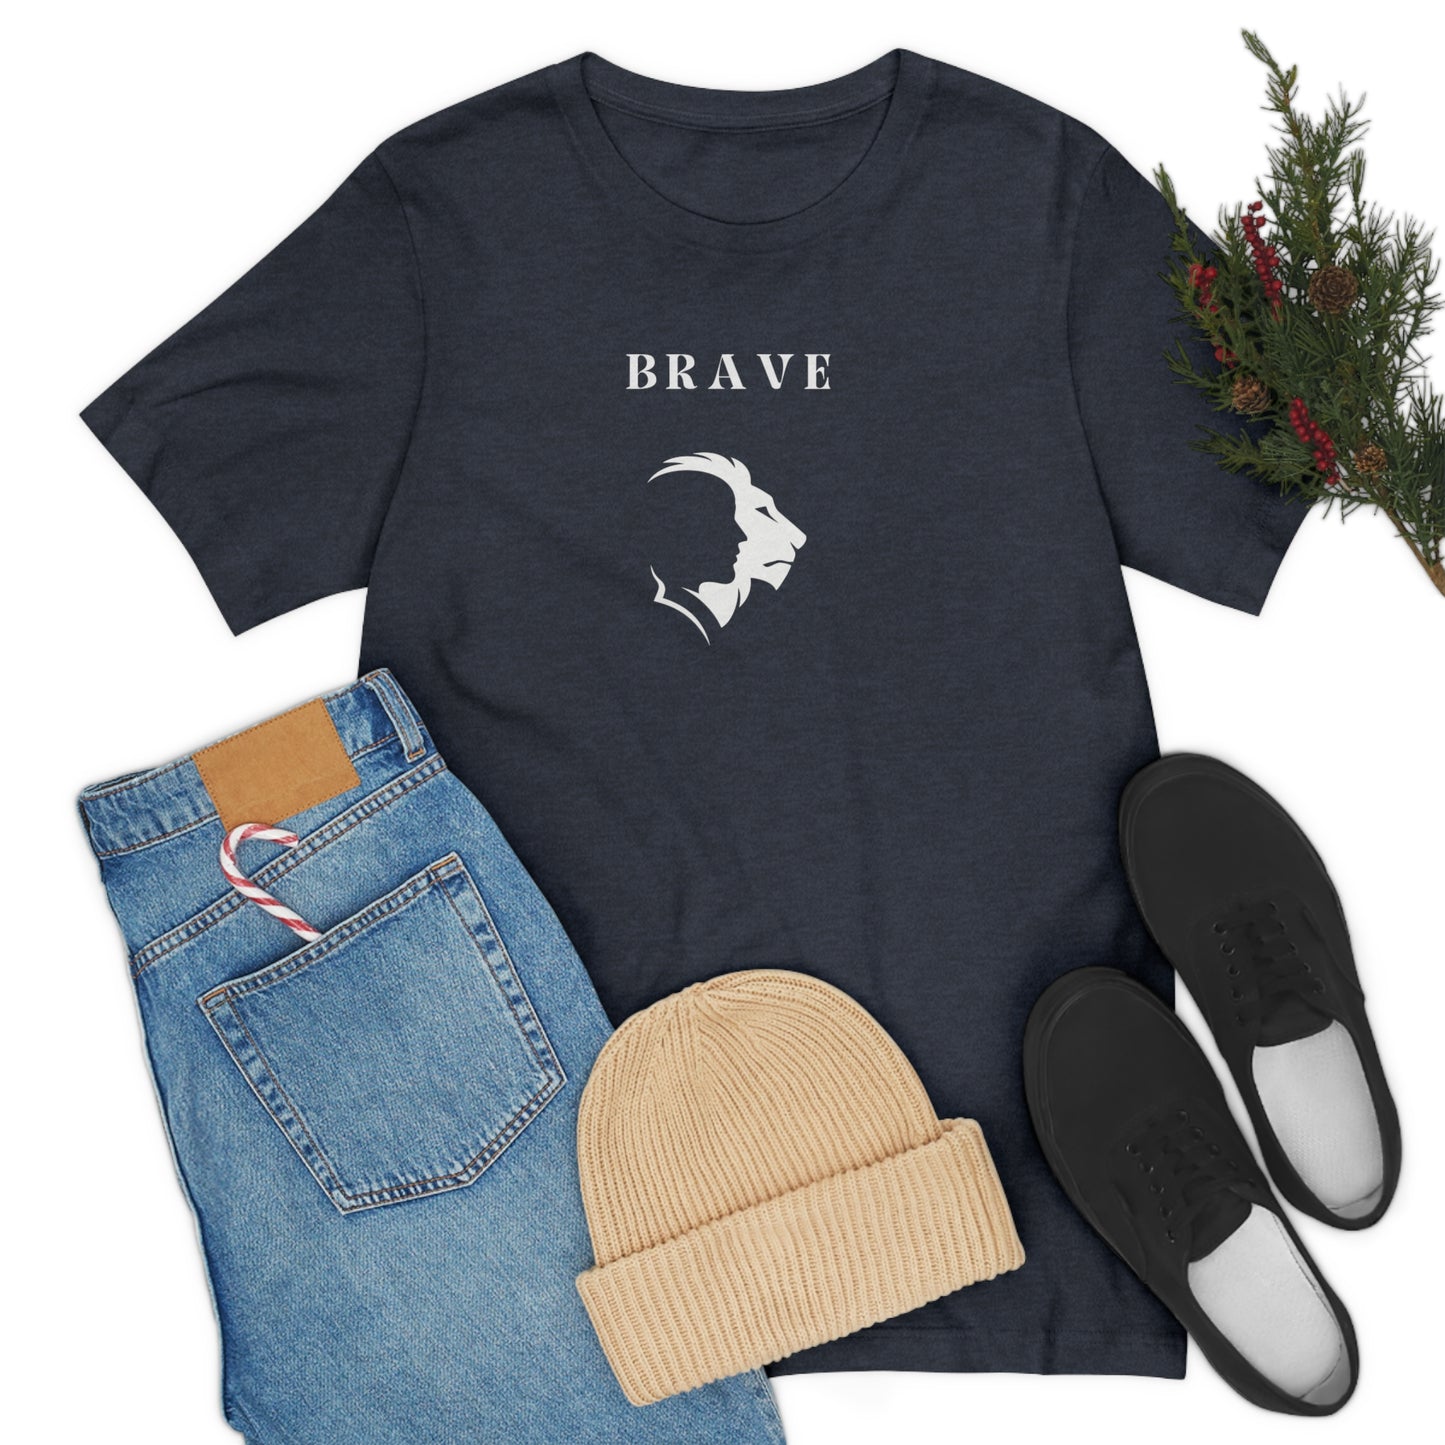 Brave unisex tshirt inspirational t shirt gifts for family and friends self affirming words t shirt